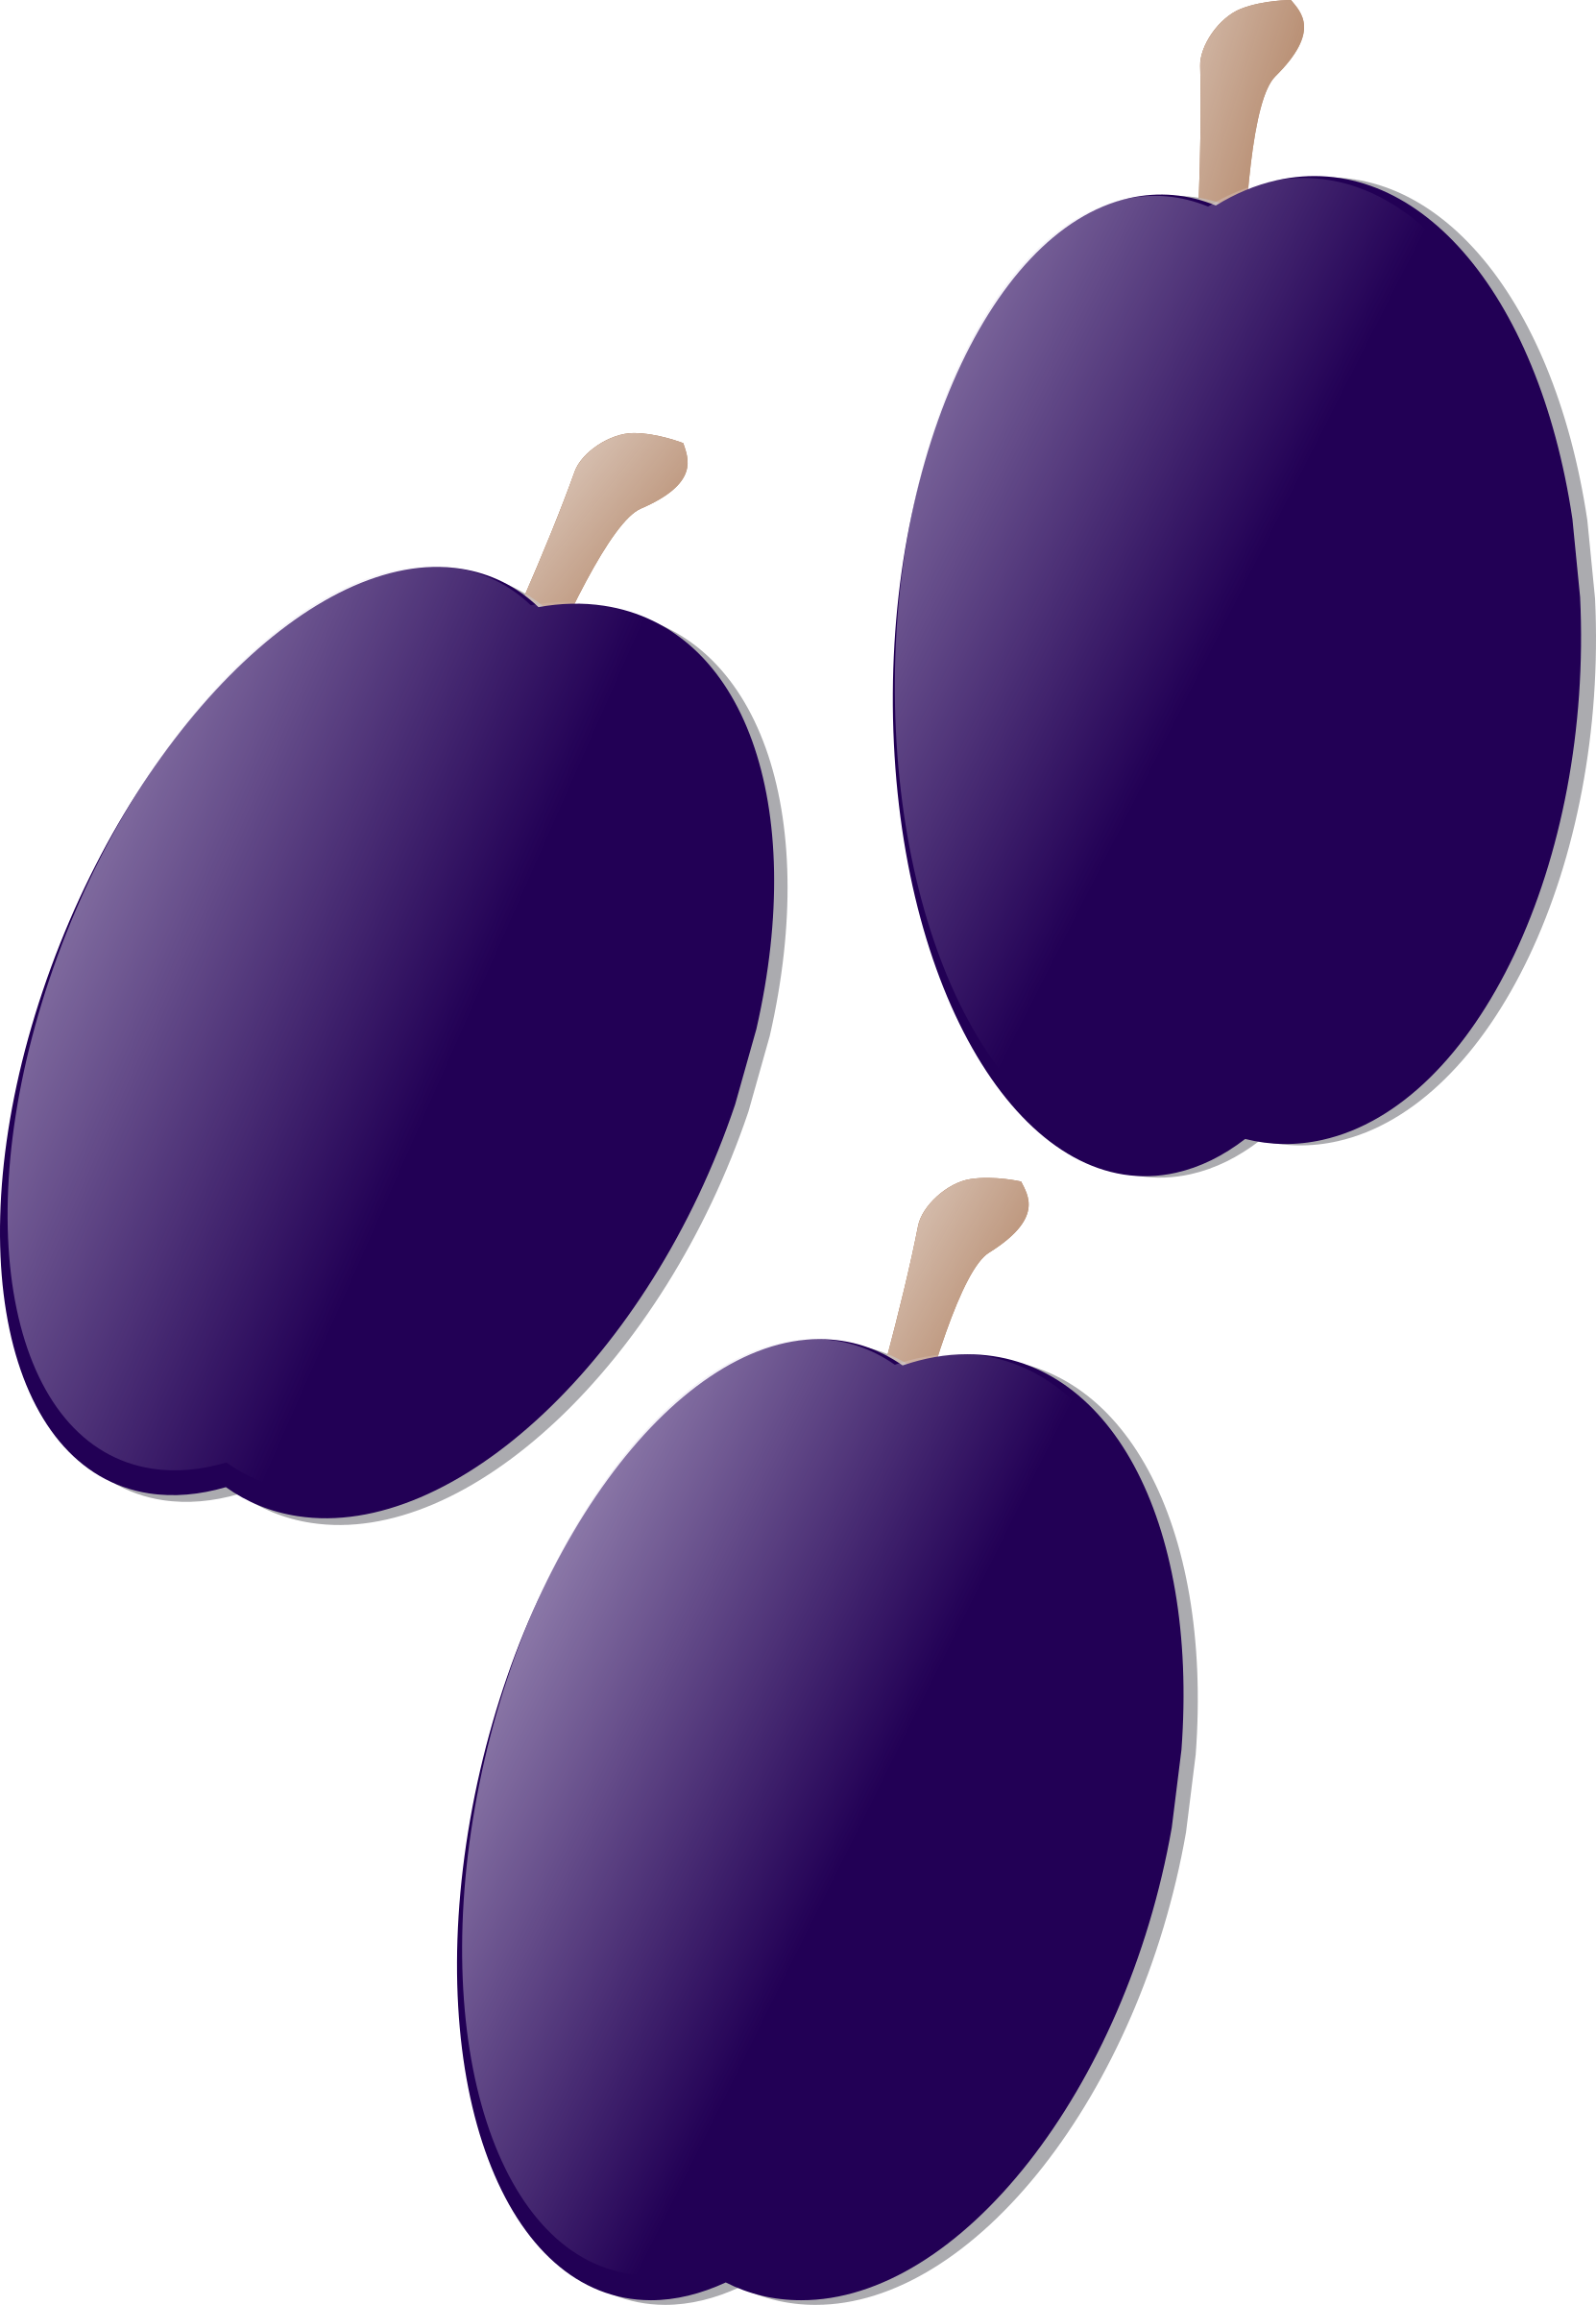 Plum clipart real. Plums big image png